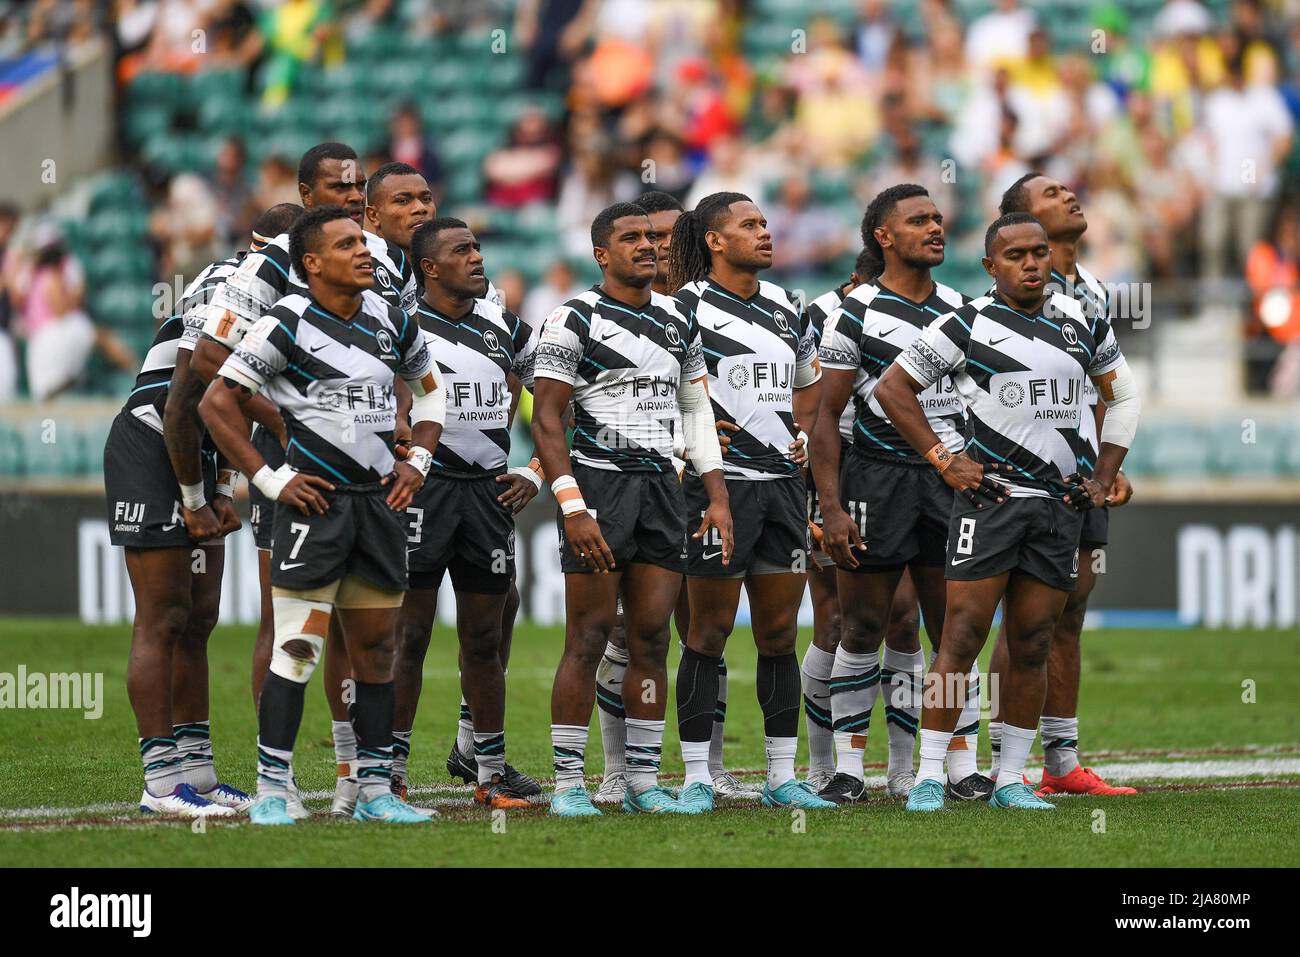 Fiji Rugby Pray before the game against USA 7's, Stock Photo